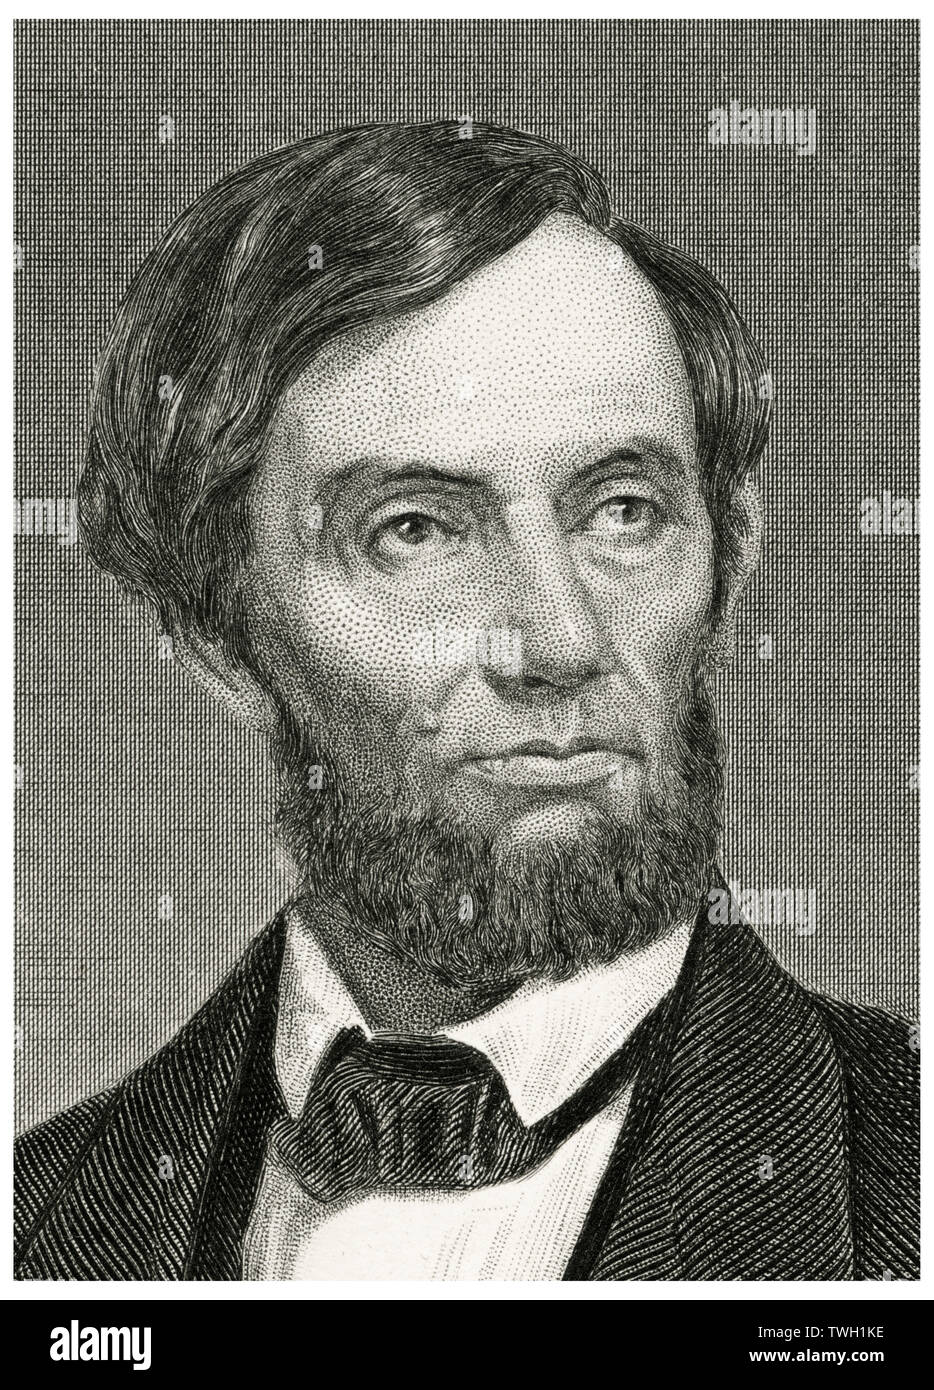 Abraham Lincoln (1809-65), 16th President of the United States, Head and Shoulders Portrait, Steel Engraving, Portrait Gallery of Eminent Men and Women of Europe and America by Evert A. Duyckinck, Published by Henry J. Johnson, Johnson, Wilson & Company, New York, 1873 Stock Photo